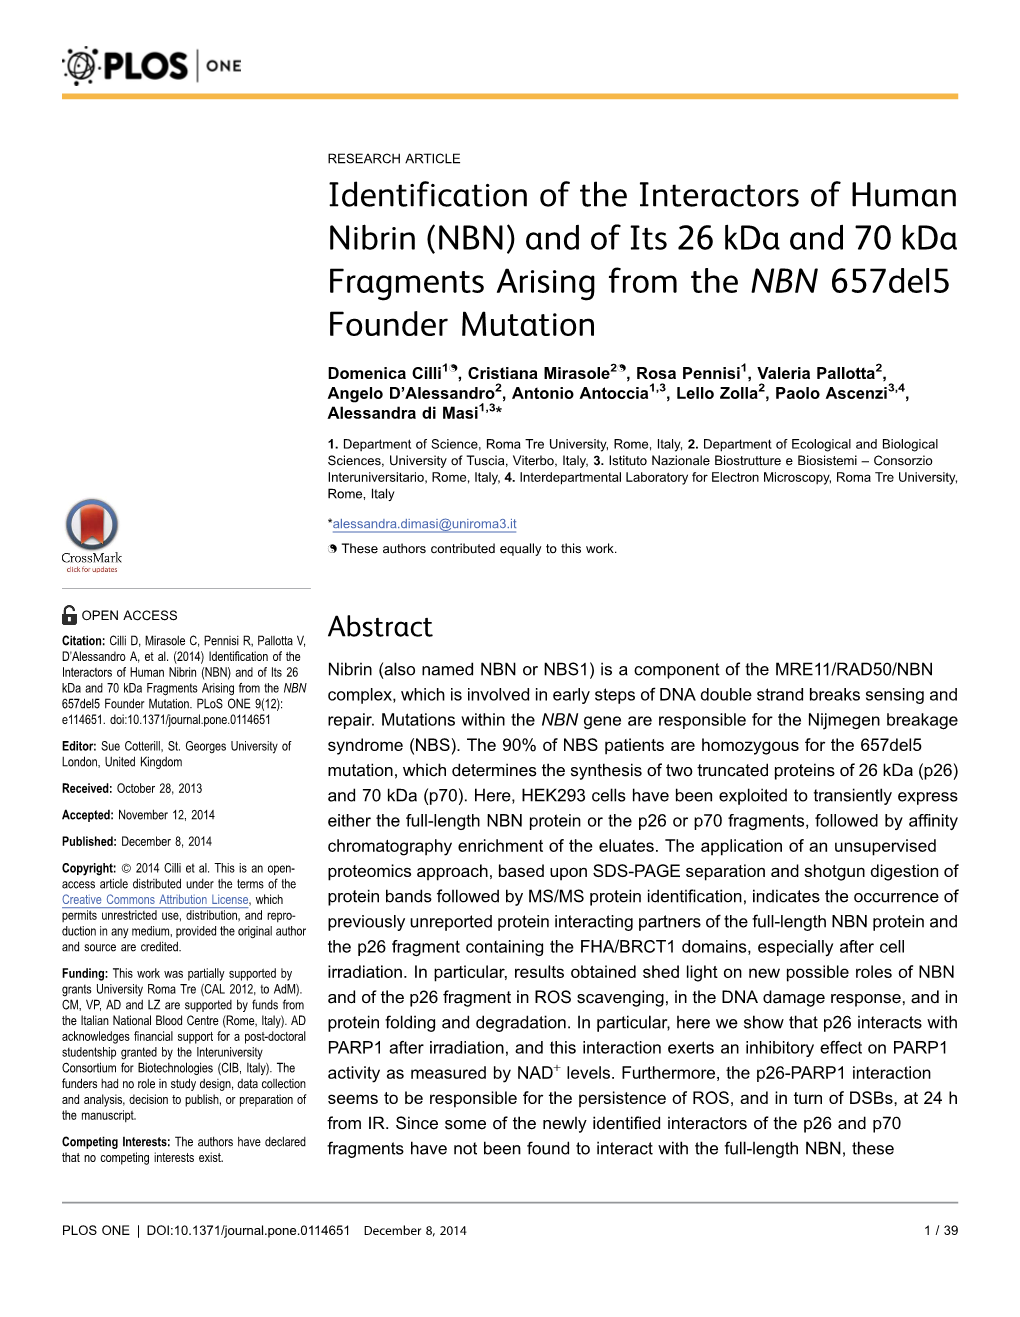 Identification of the Interactors of Human Nibrin (NBN) and of Its 26 Kda and 70 Kda Fragments Arising from the NBN 657Del5 Founder Mutation